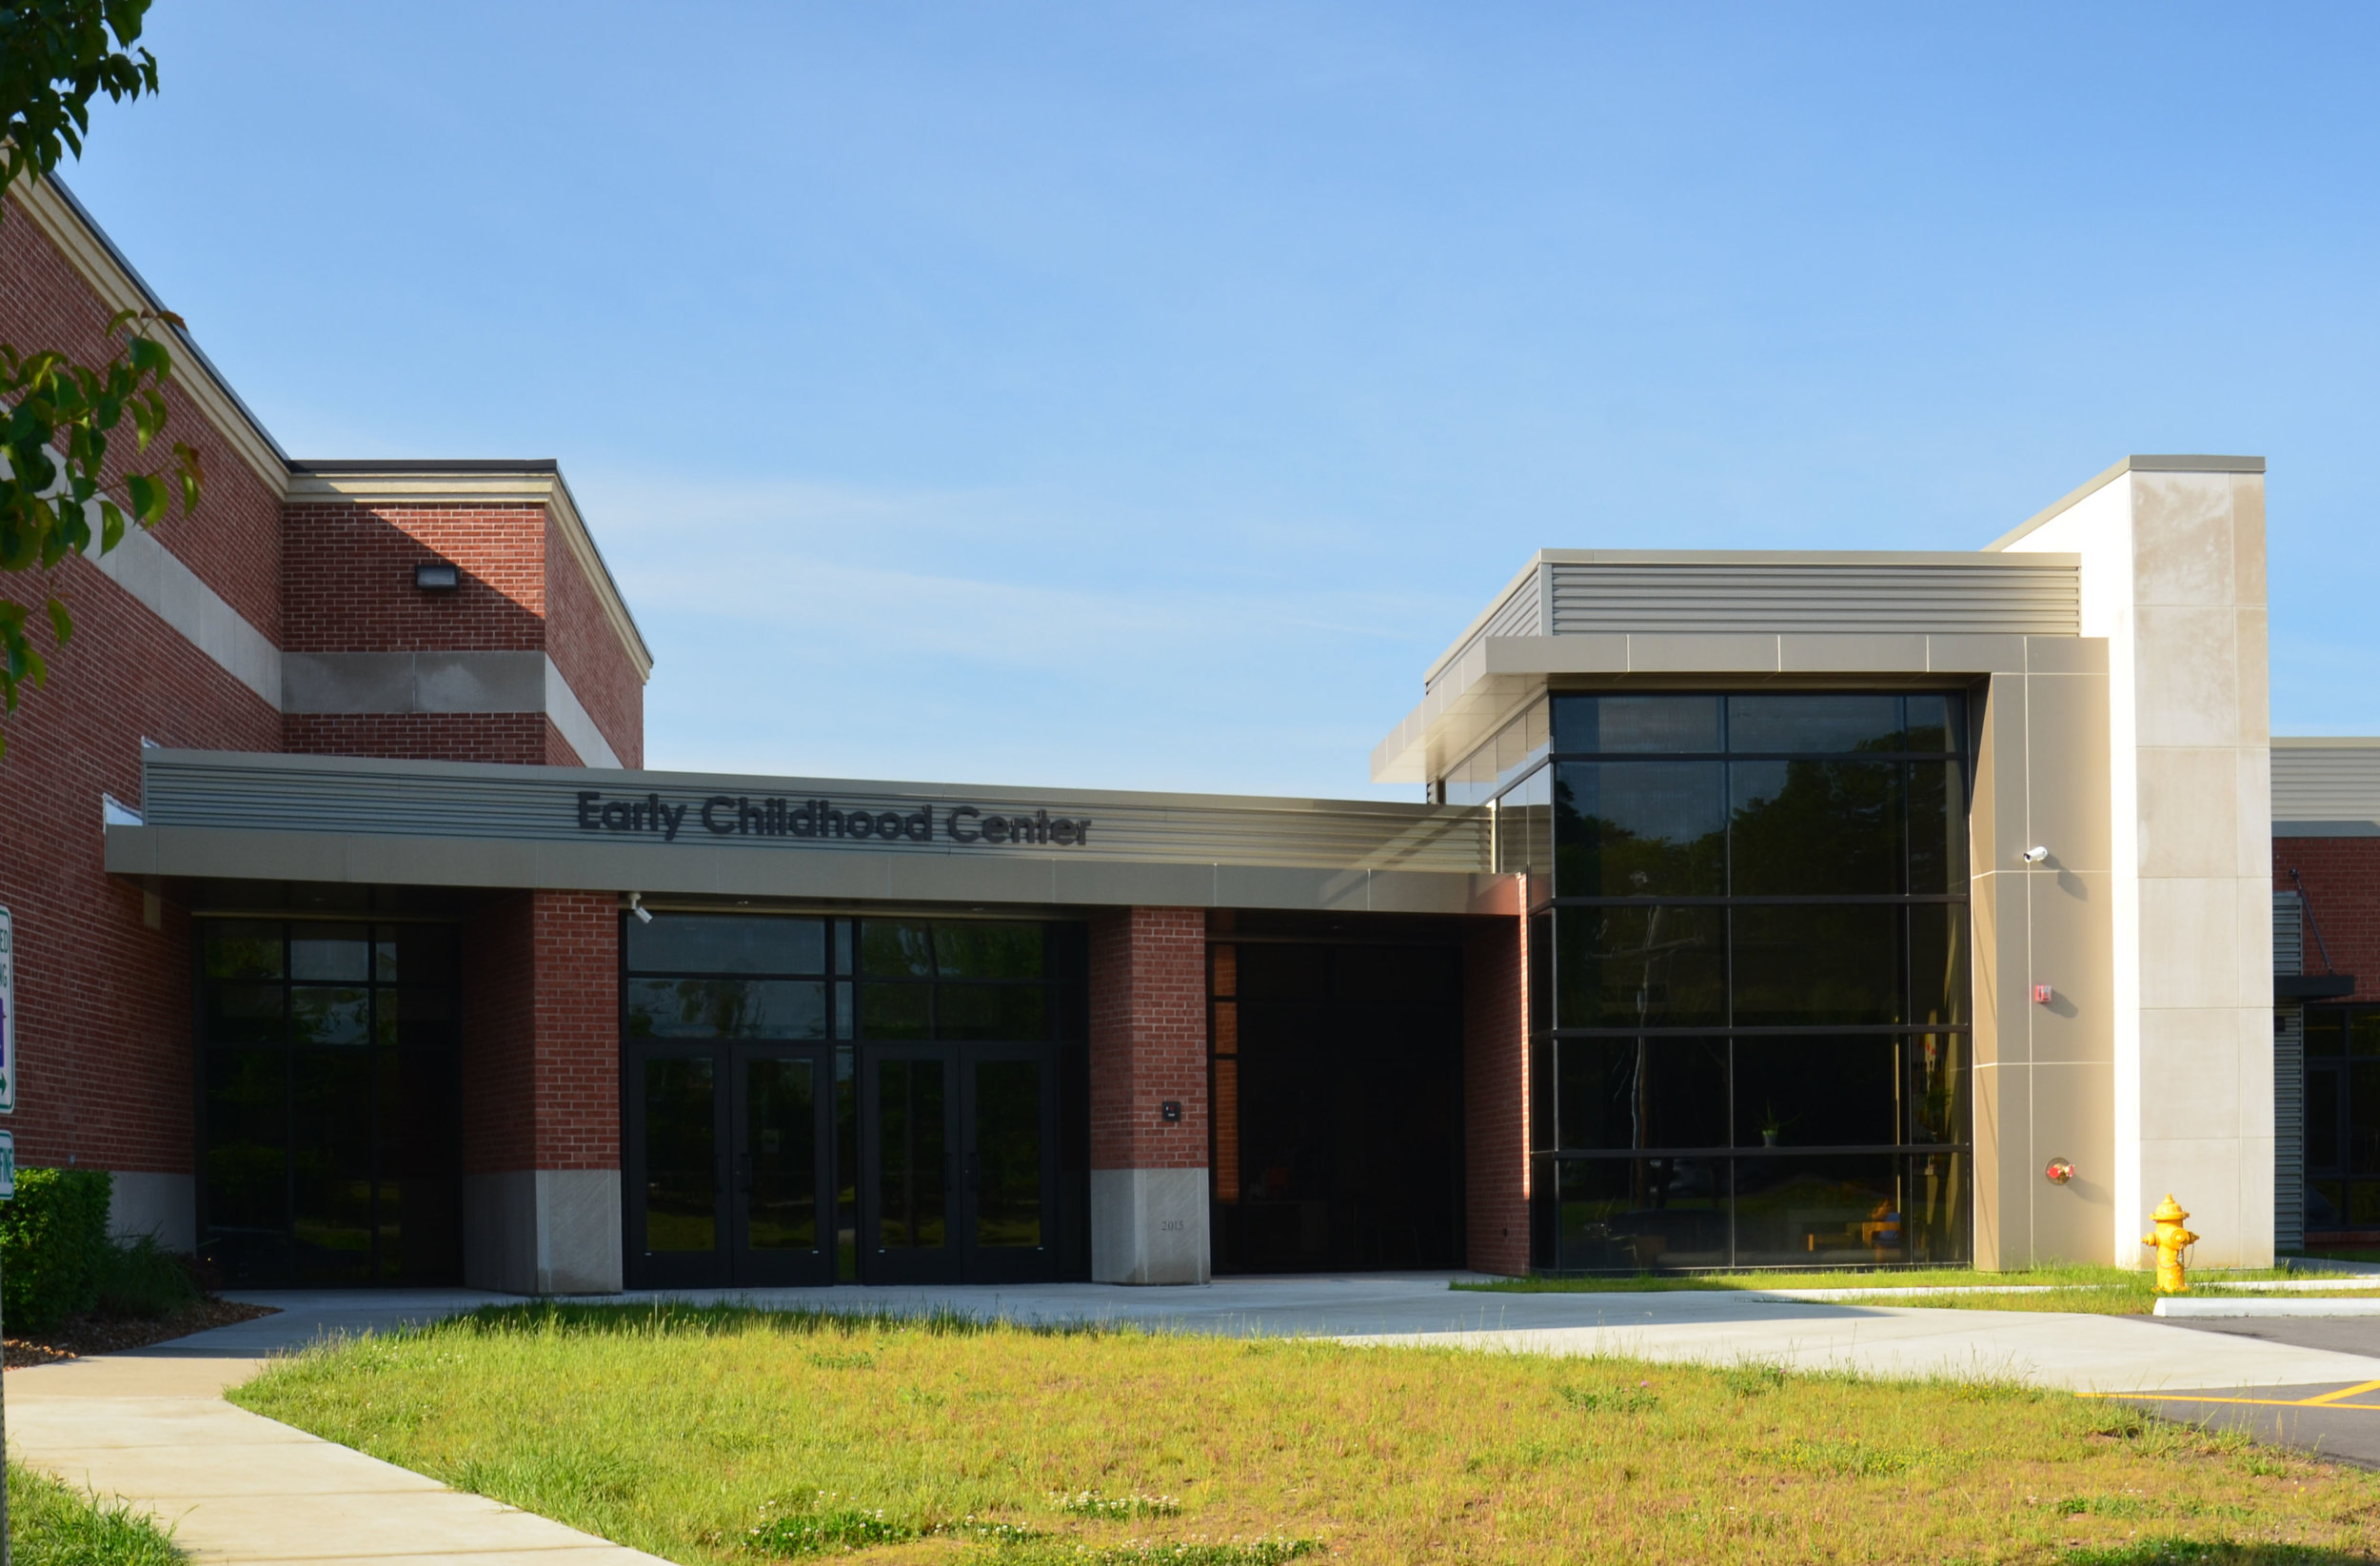 Early Childhood Center Exterior (Copy)